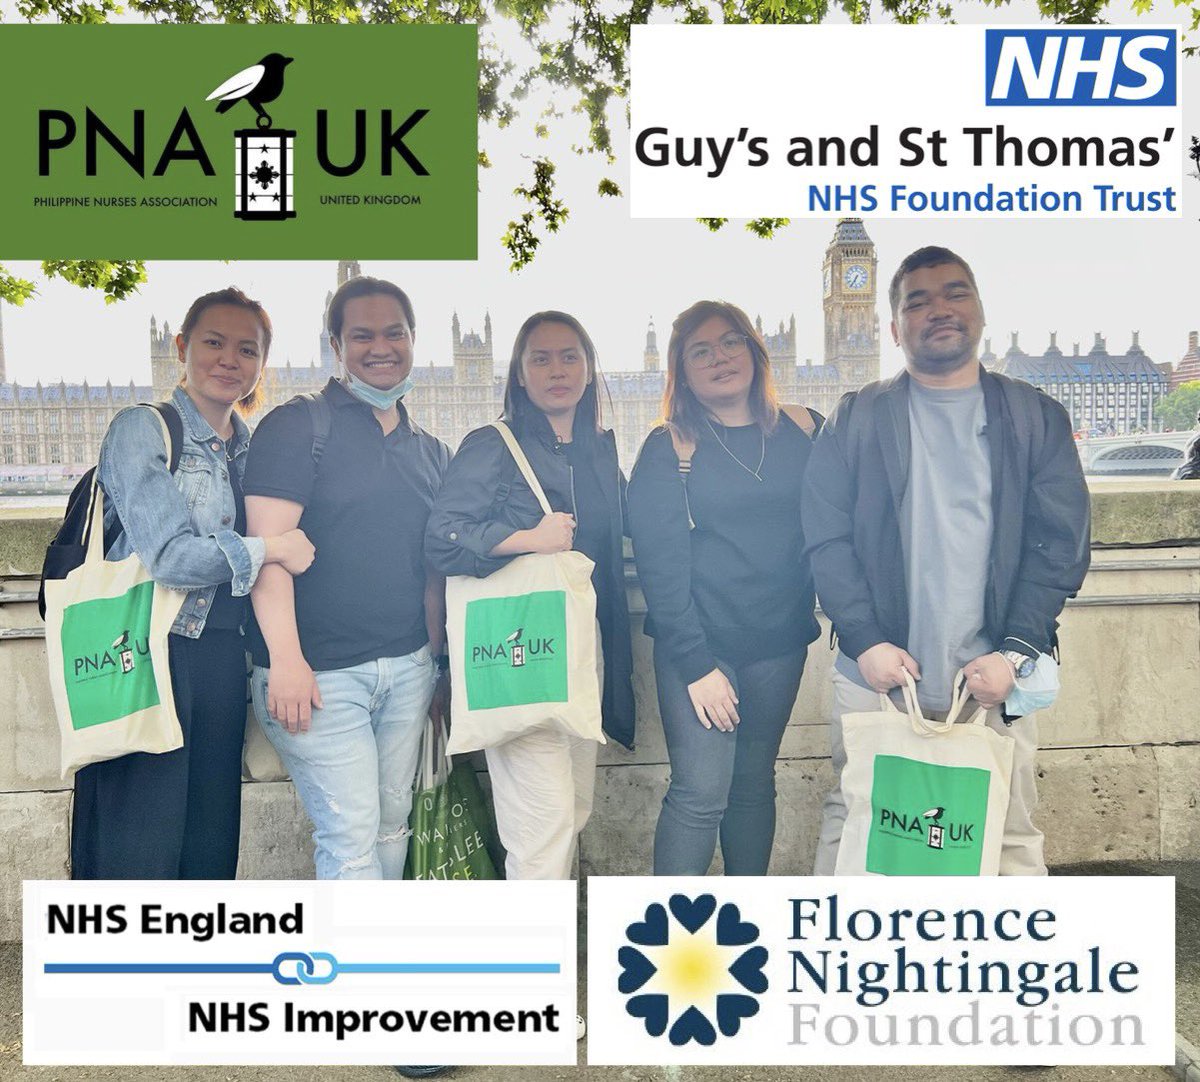 More #IENs welcomed by @PNA_UKnurses @jmac1218 @GSTTnhs & provided with welcome hampers made possible by @NHSEngland & @FNightingaleF @CNOEngland @westwood_greta @GemmaStacey10 @LucyBrownFNF @duncan_CNSE w/ @GoalsOlivers @Remah_Tabjan @avey_bhatia #TeamFlorence @seacolestatue